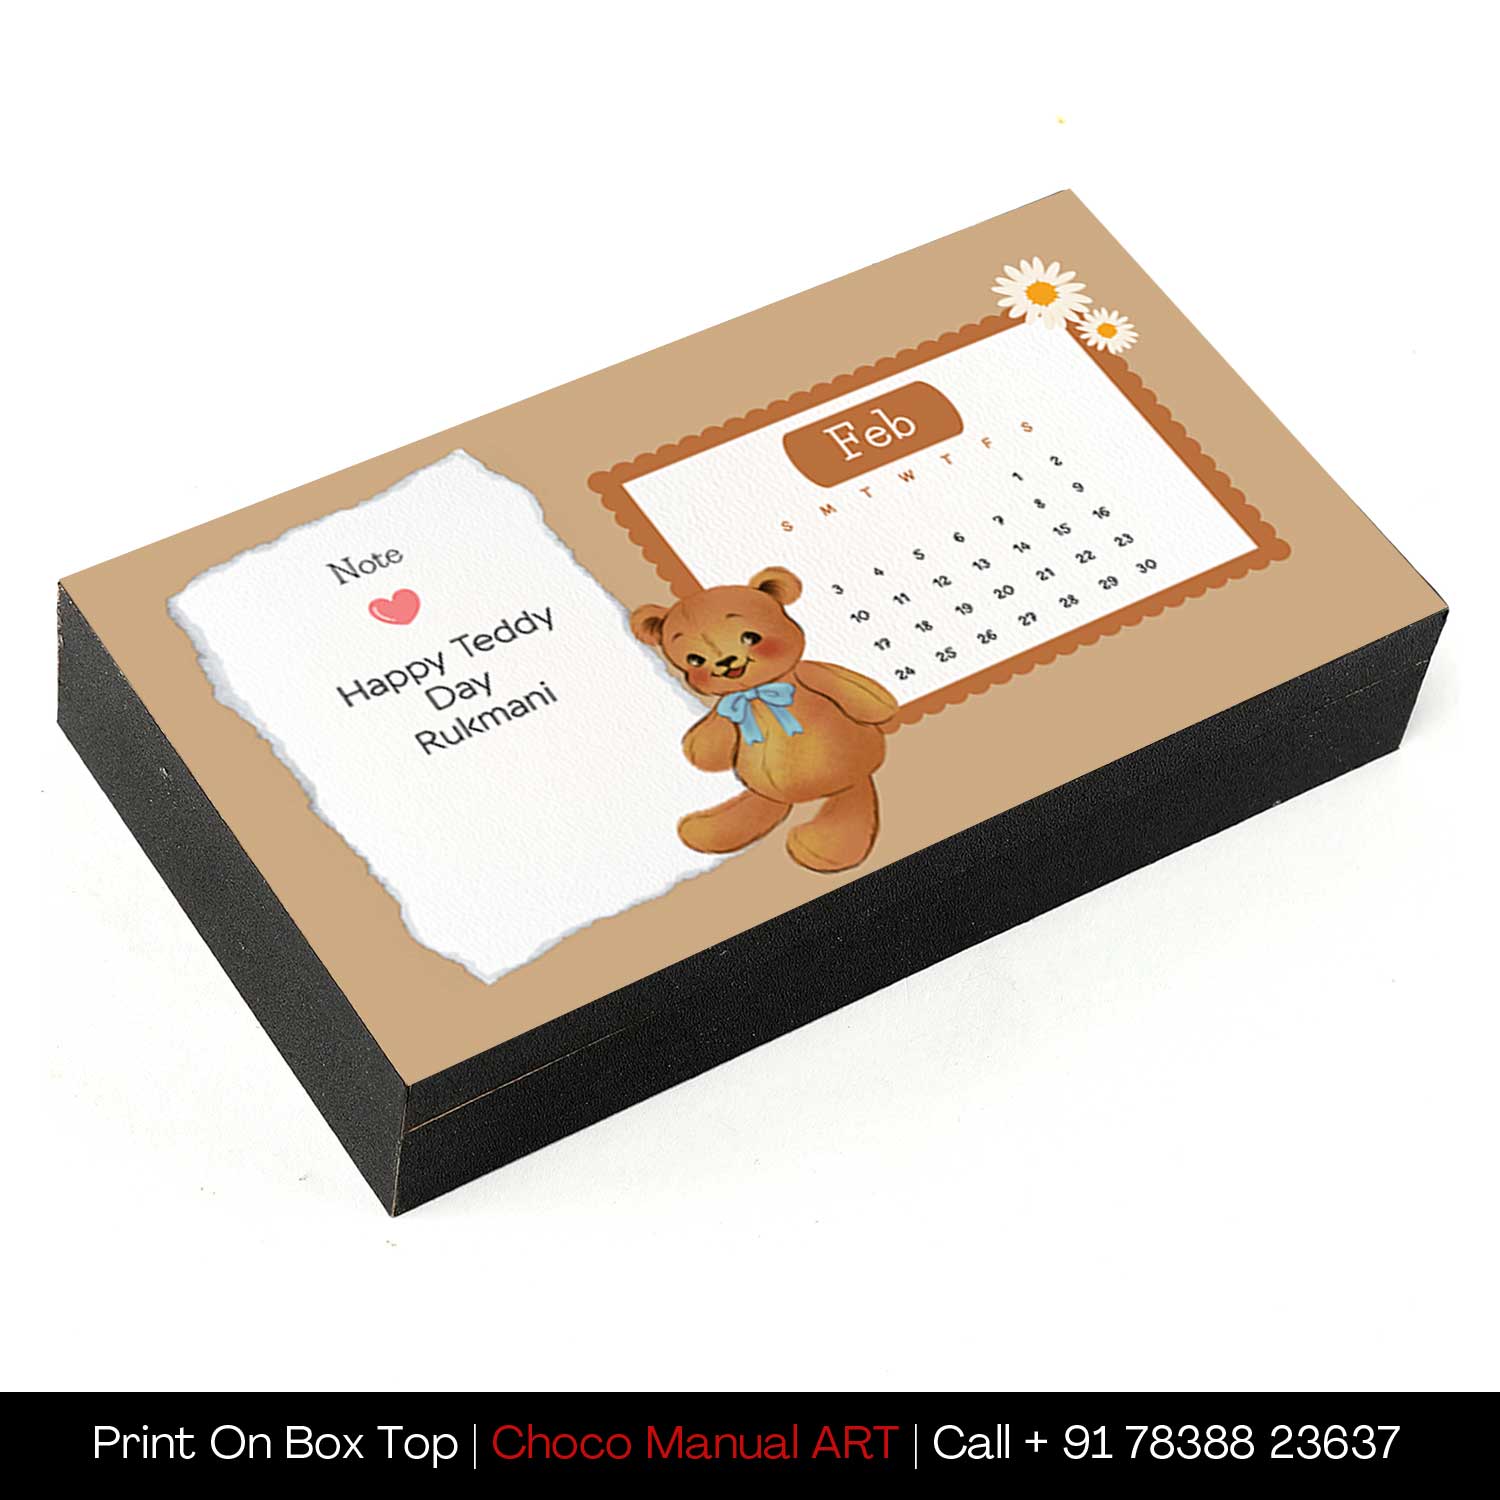 Personalized Teddy Day chocolate gift with photo/name printed